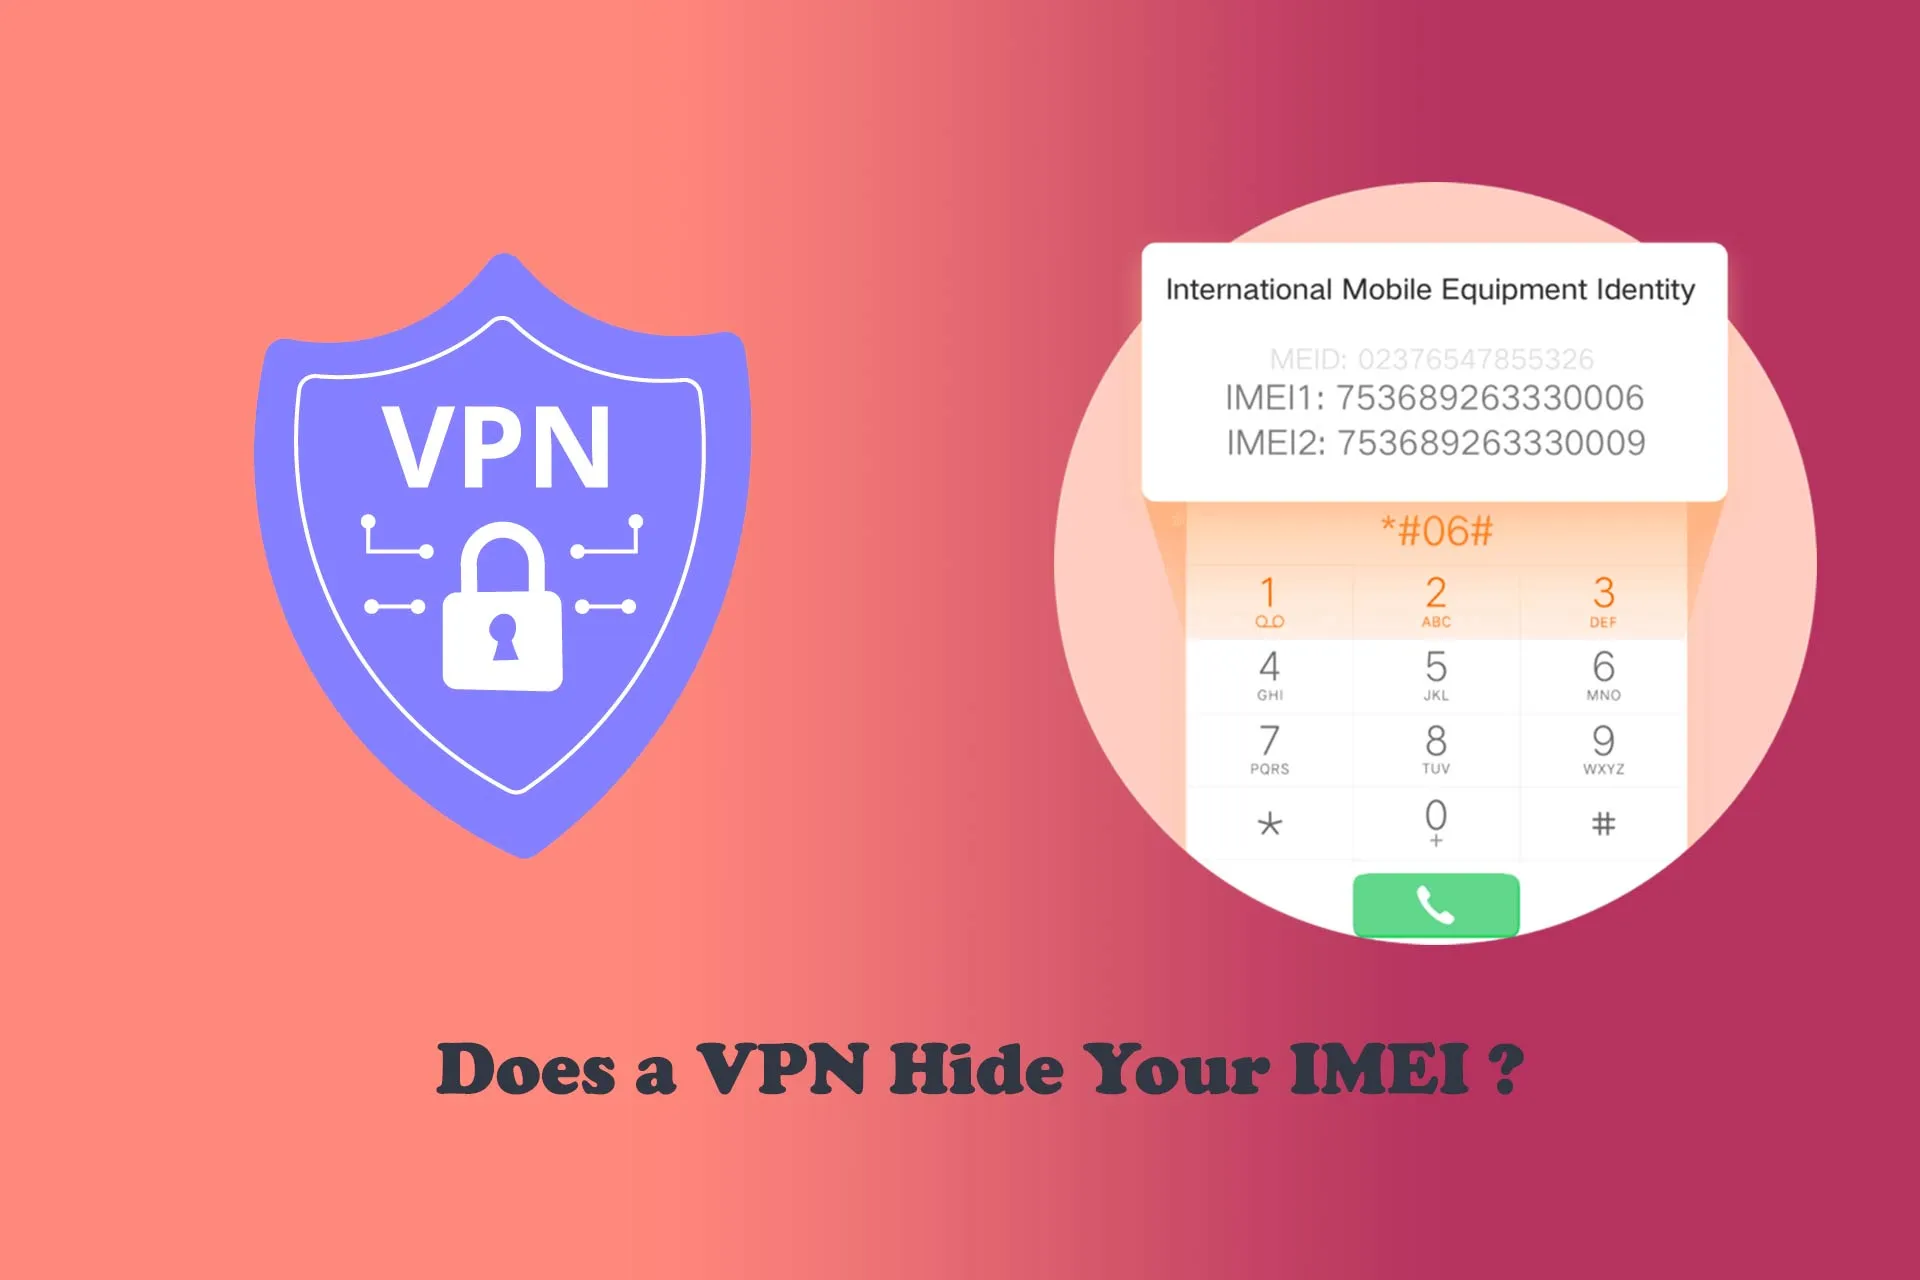 Does a VPN Hide Your IMEI